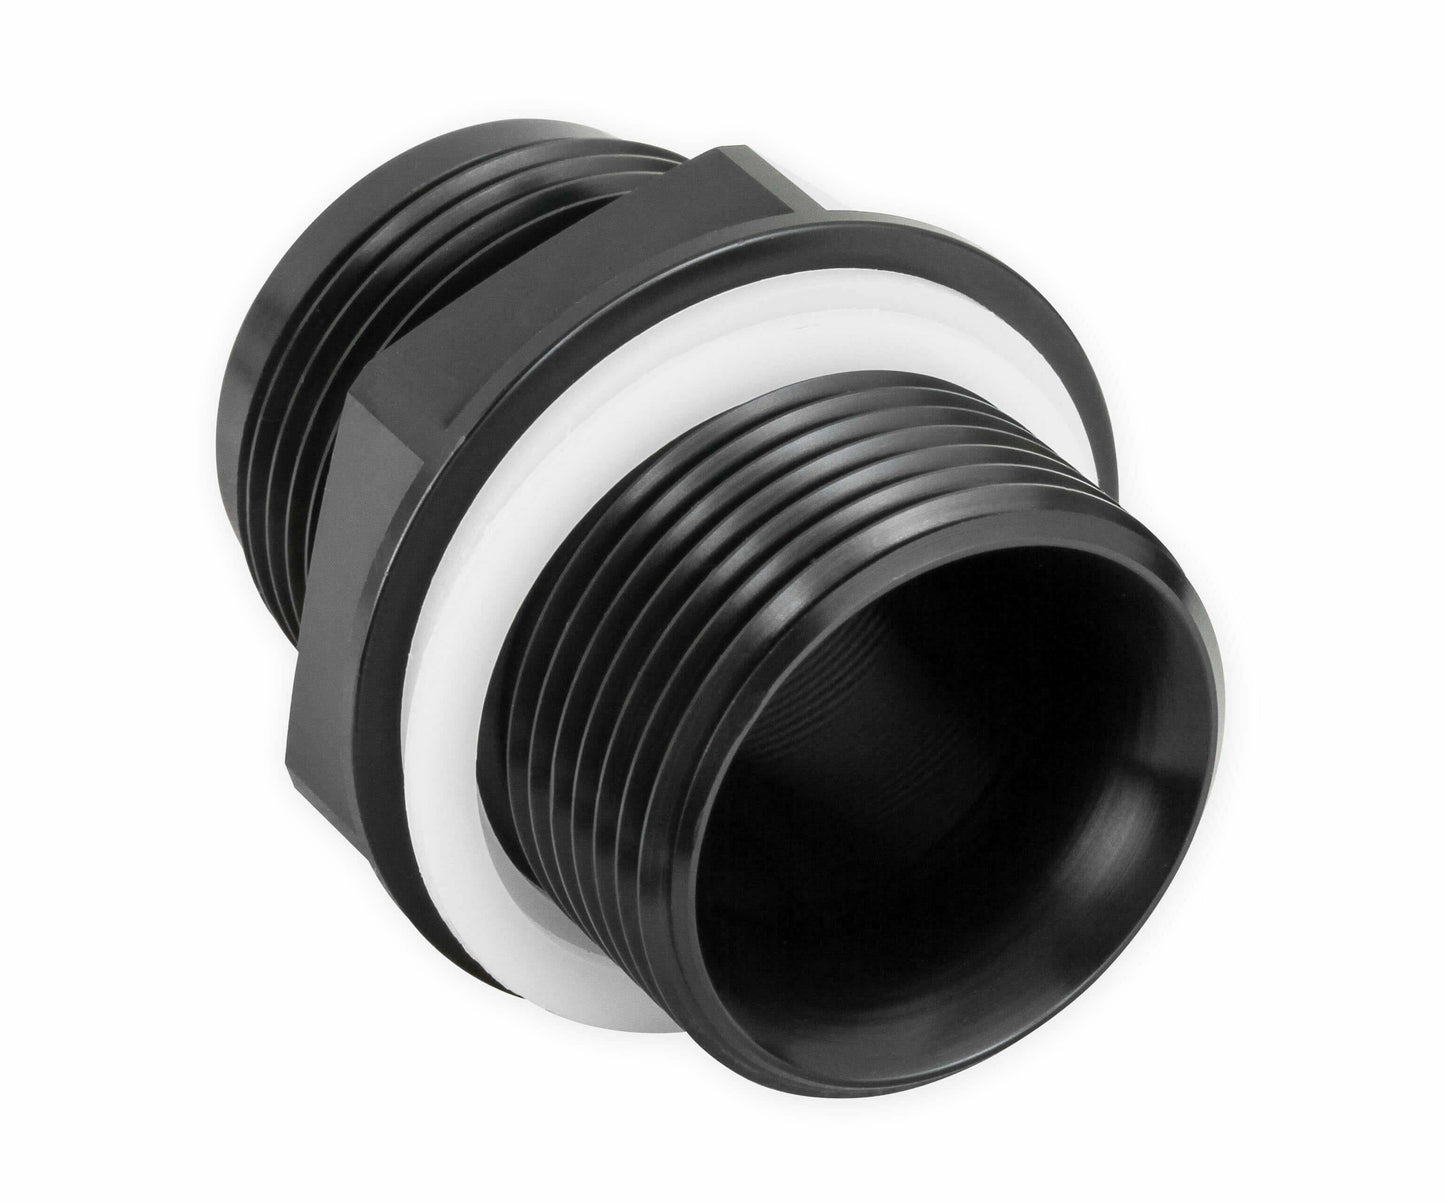 Earls Fuel Cell Bulkhead Fitting - AT983816ERL